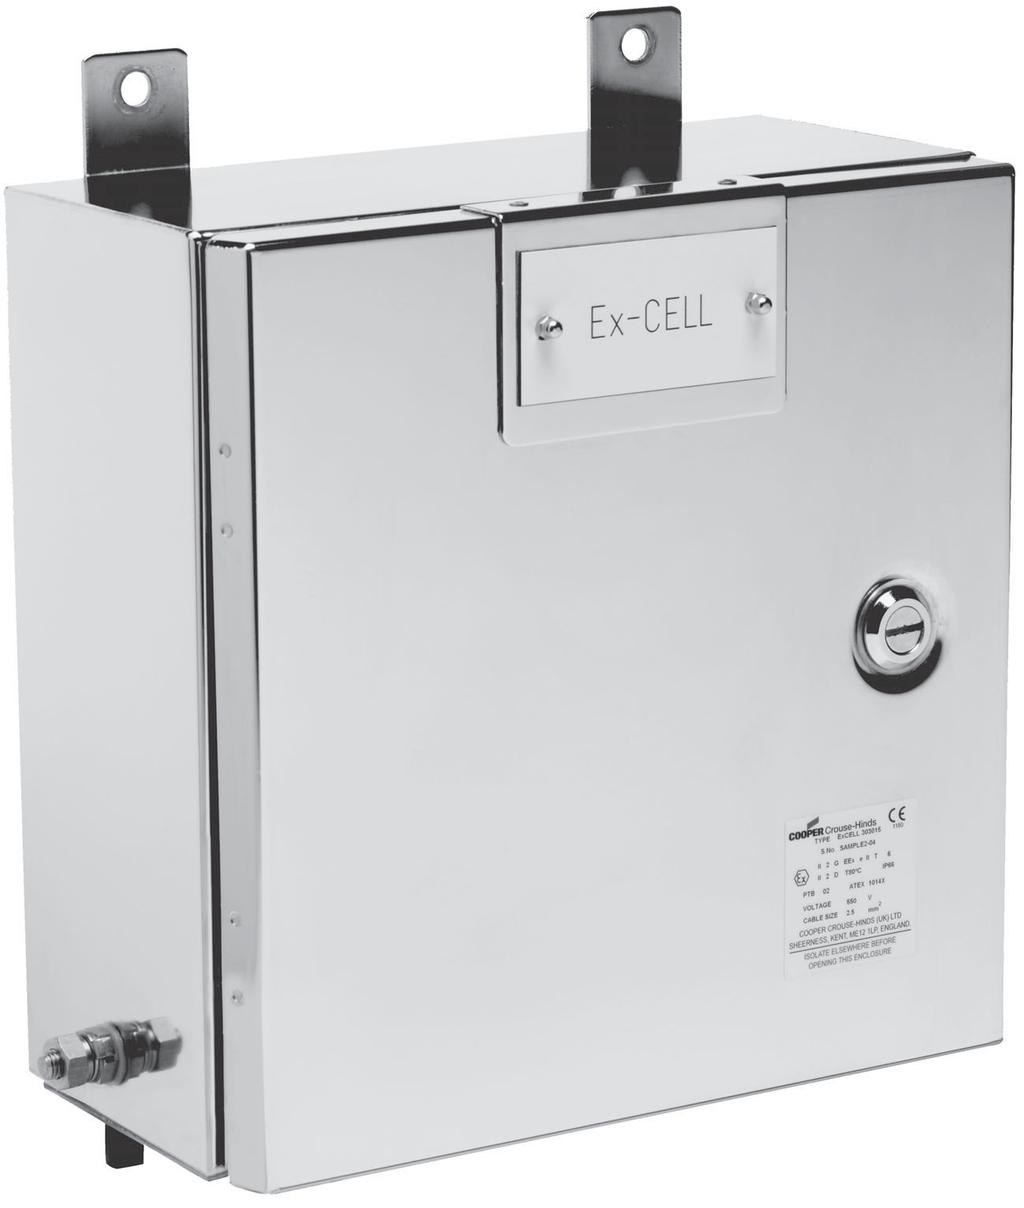 Ex-CELL Stainless Steel and Features The enclosure is mounted using four heavy-duty, 3mm thick, surface welded